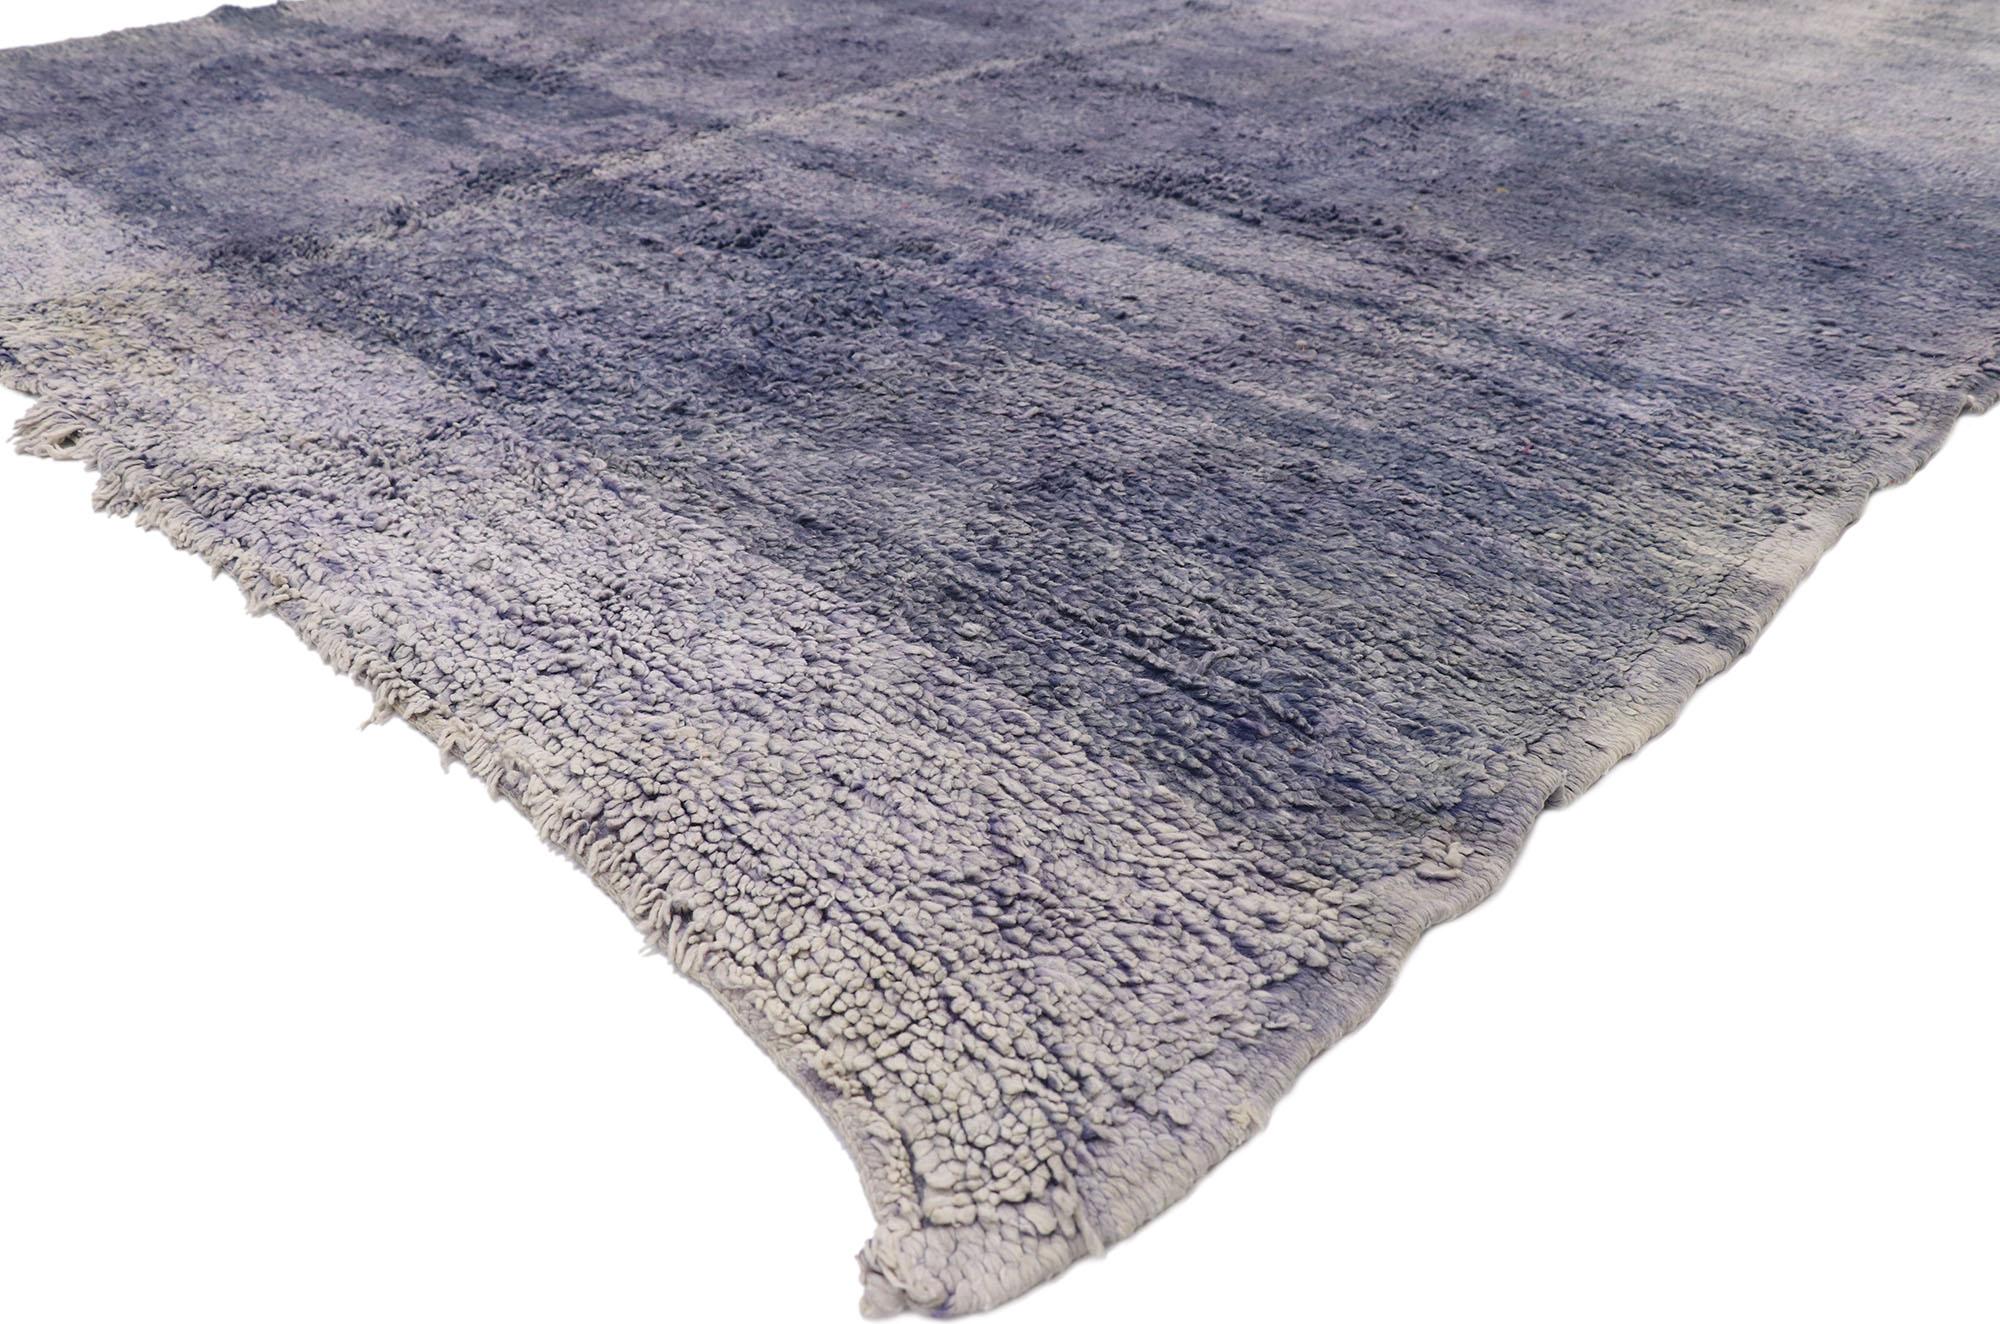 21025, vintage Berber Ombre Moroccan rug with boho beach Vibes and Modern style. Tranquil lavender hues combined with the plush wool pile creates an endlessly fascinating ombre effect in this hand knotted wool vintage Berber Moroccan rug. An